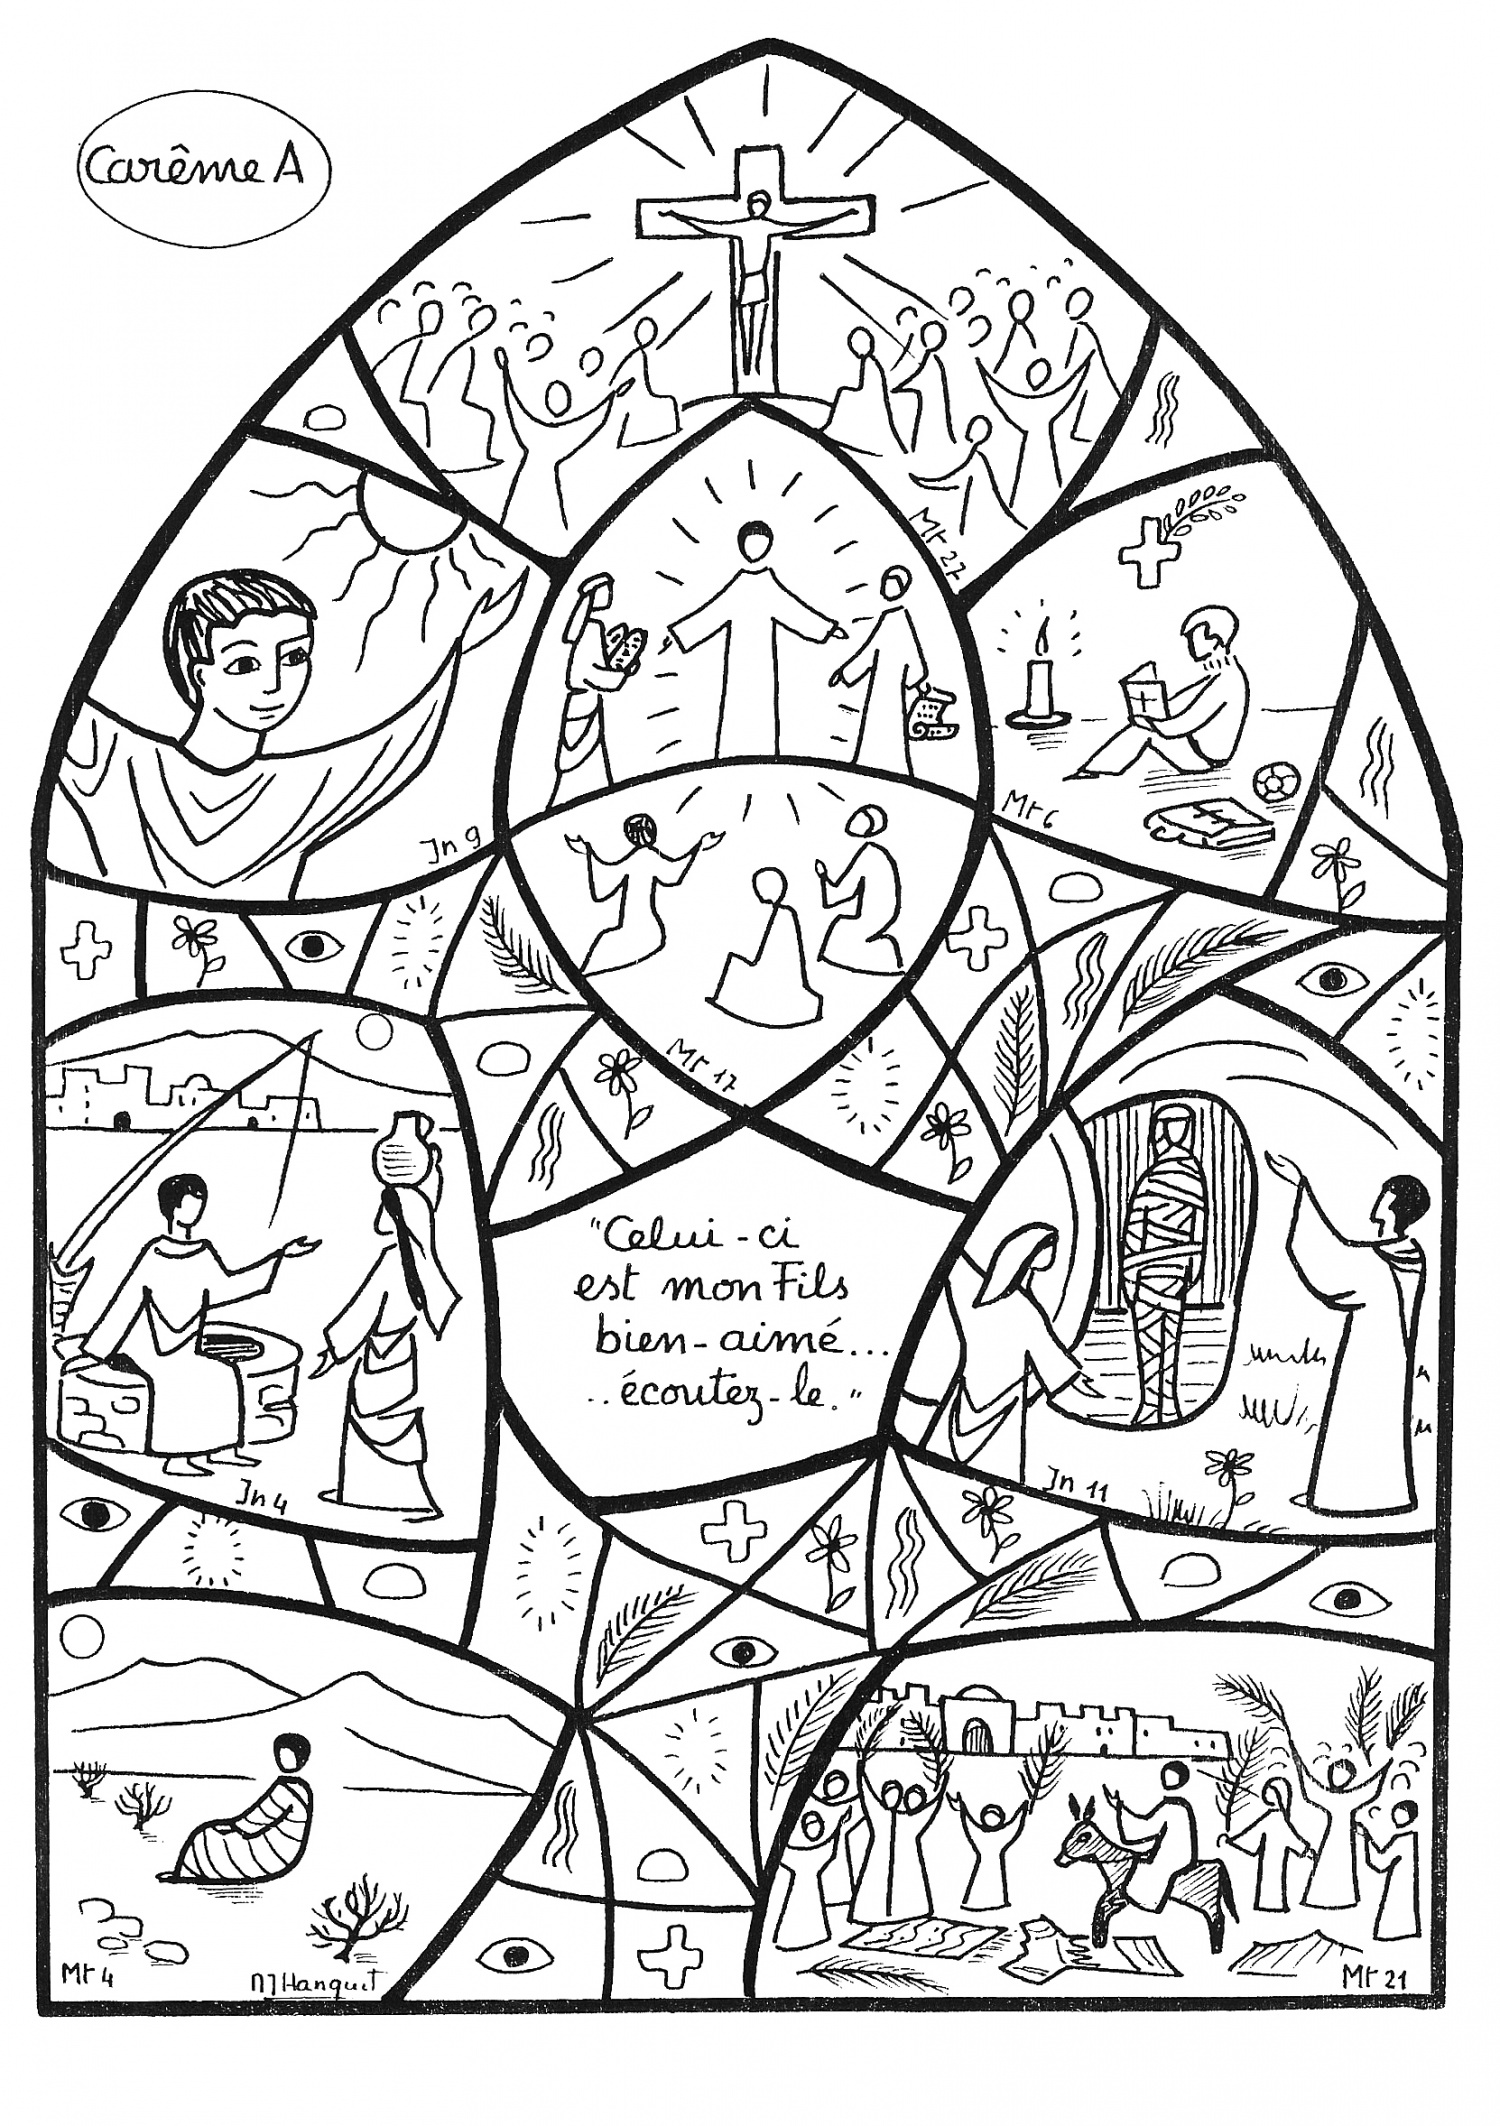 good friday coloring page